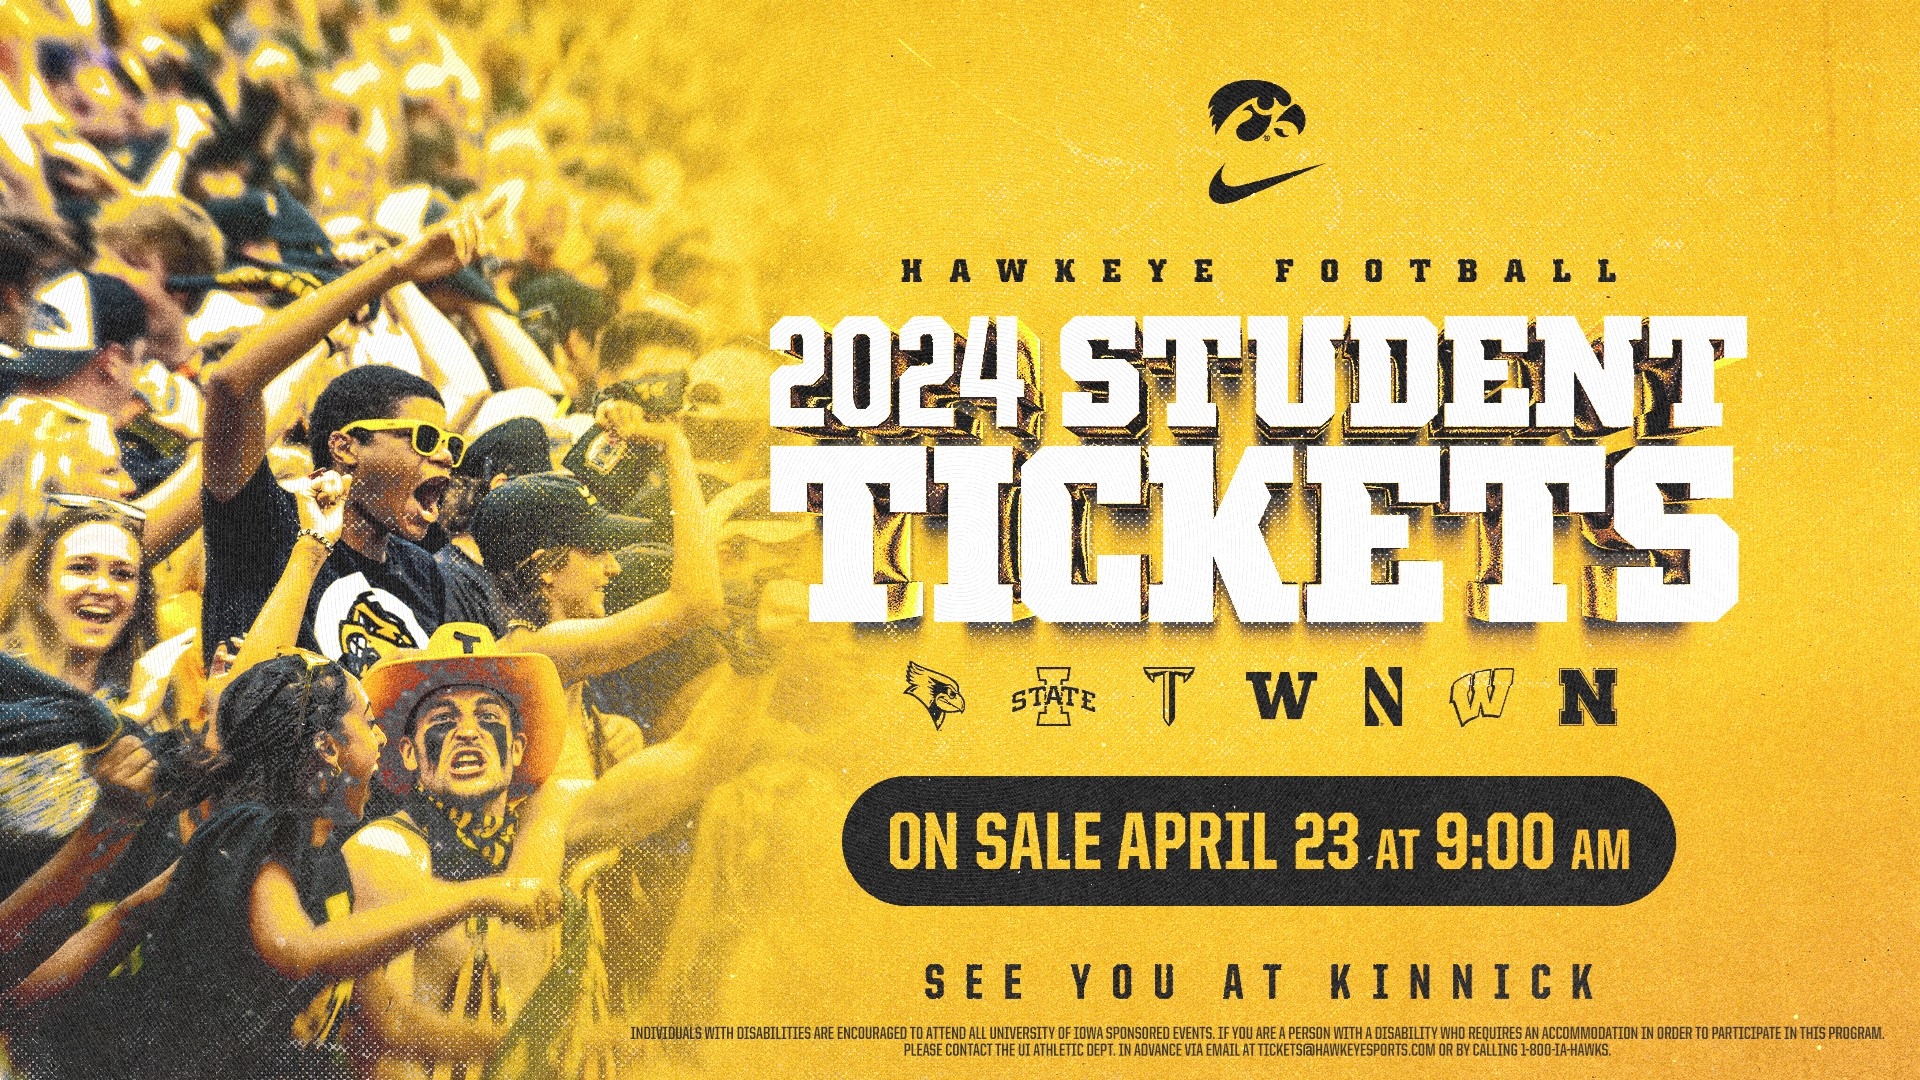 Hawkeye Football 2024 student tickets on sale April 23 at 9am. See you at Kinnick.